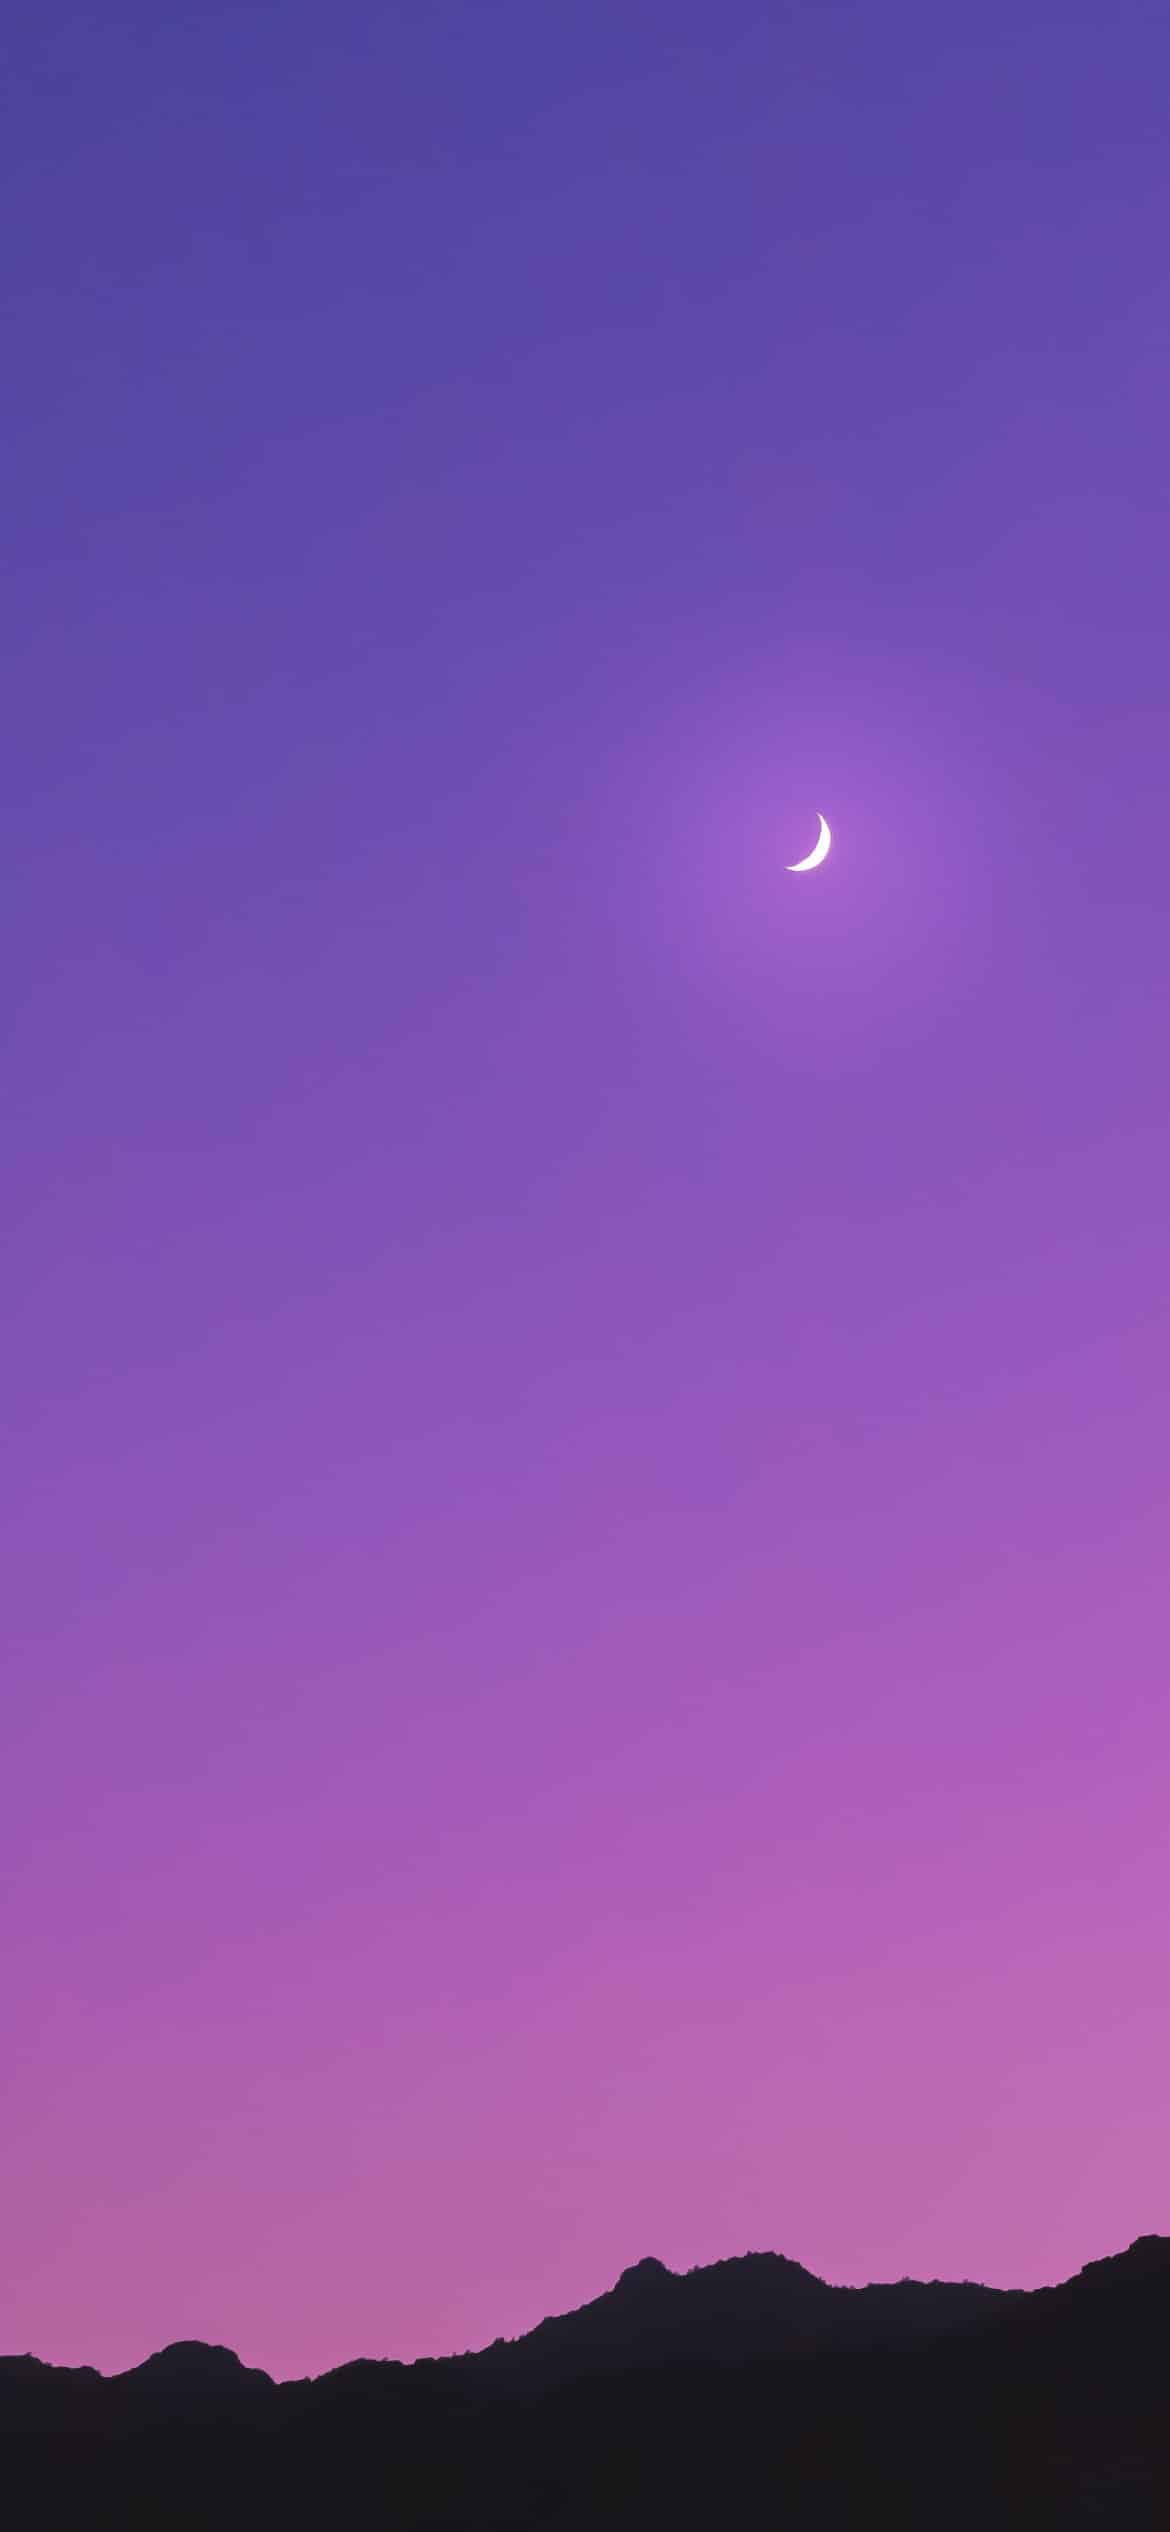 The moon and stars in a purple sky - Moon